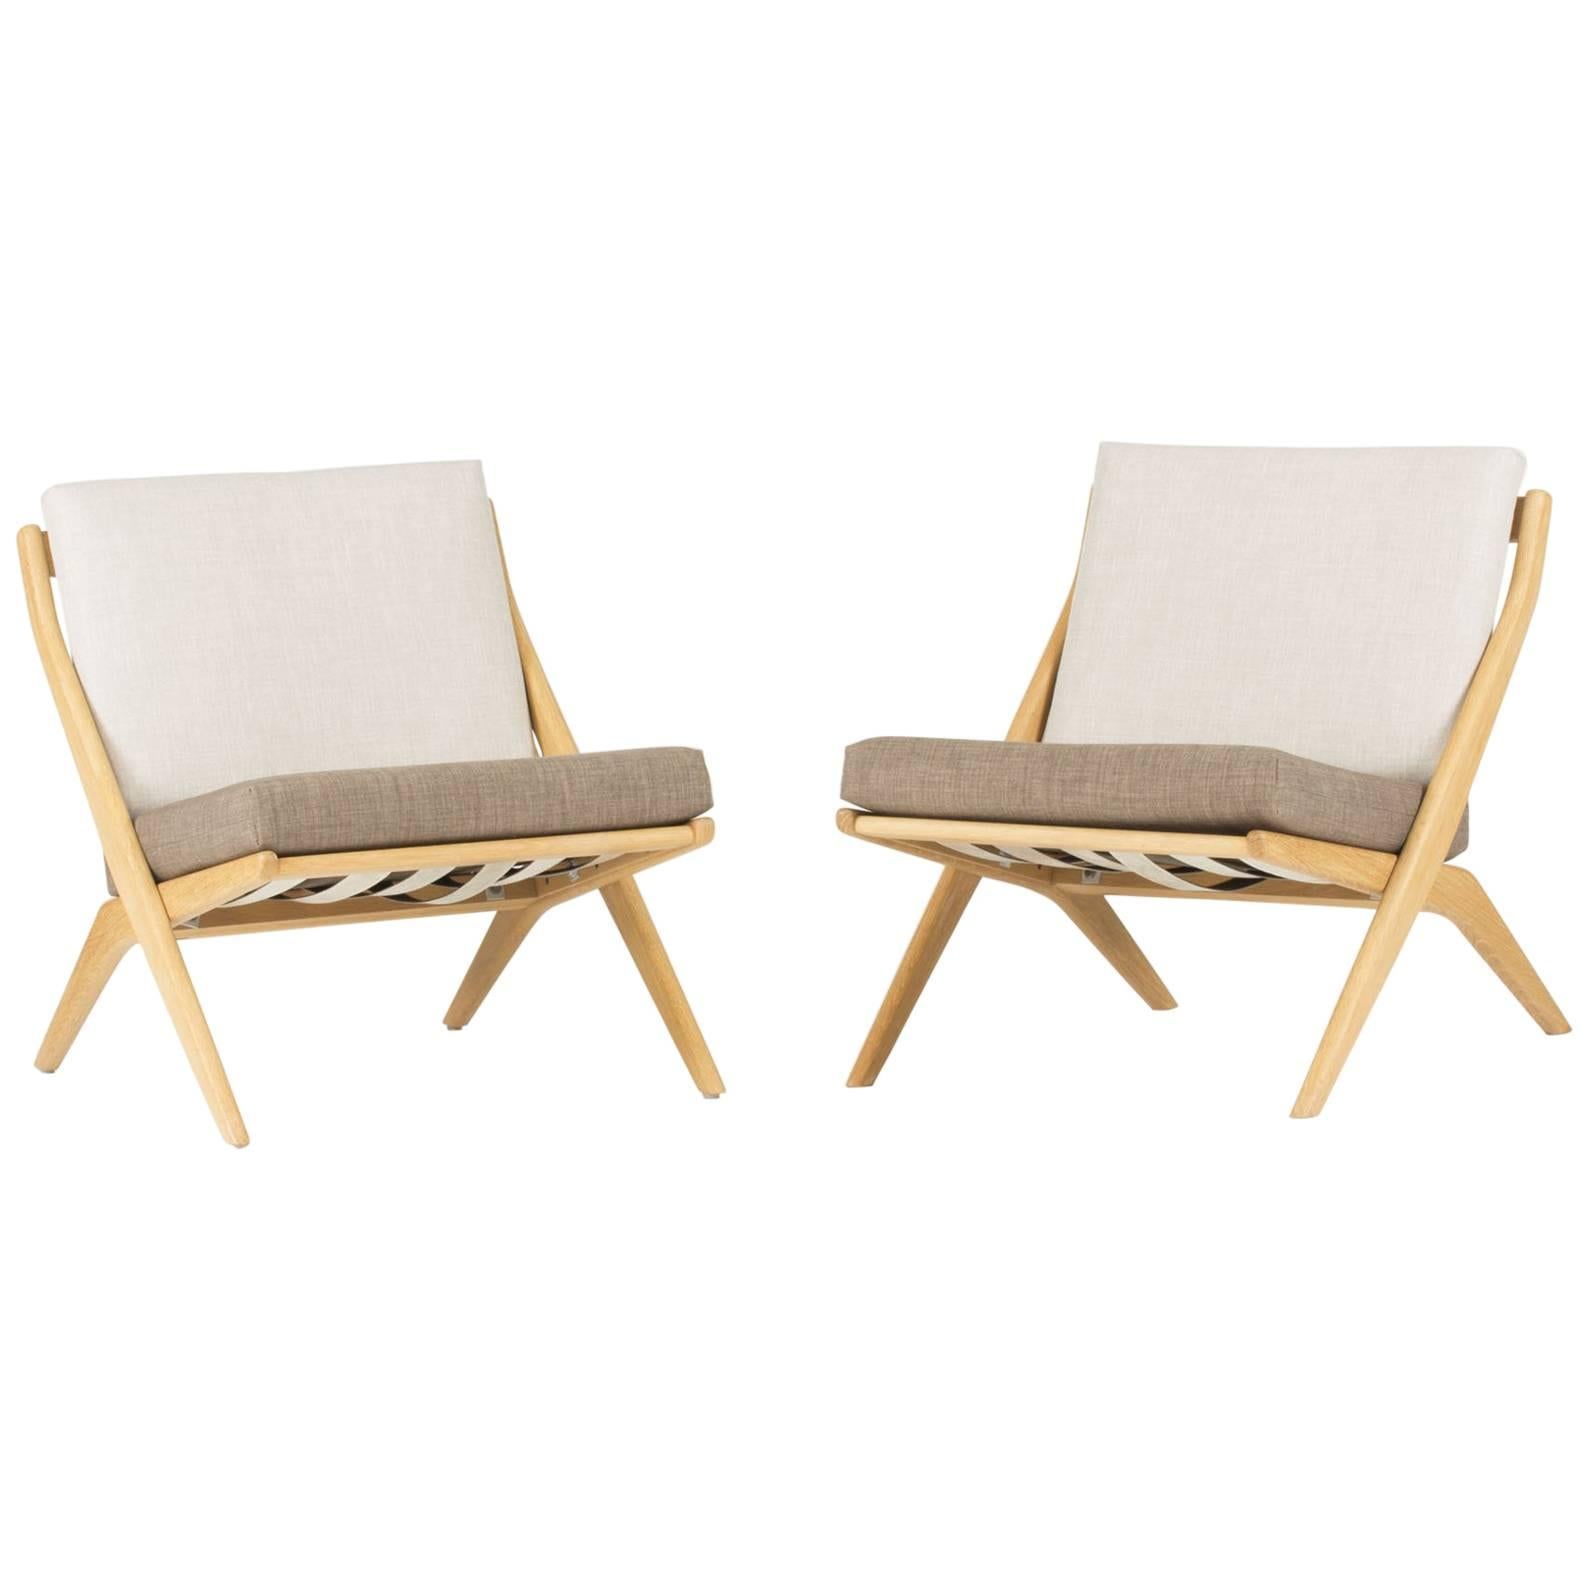 Pair of Lounge Chairs by Folke Ohlsson